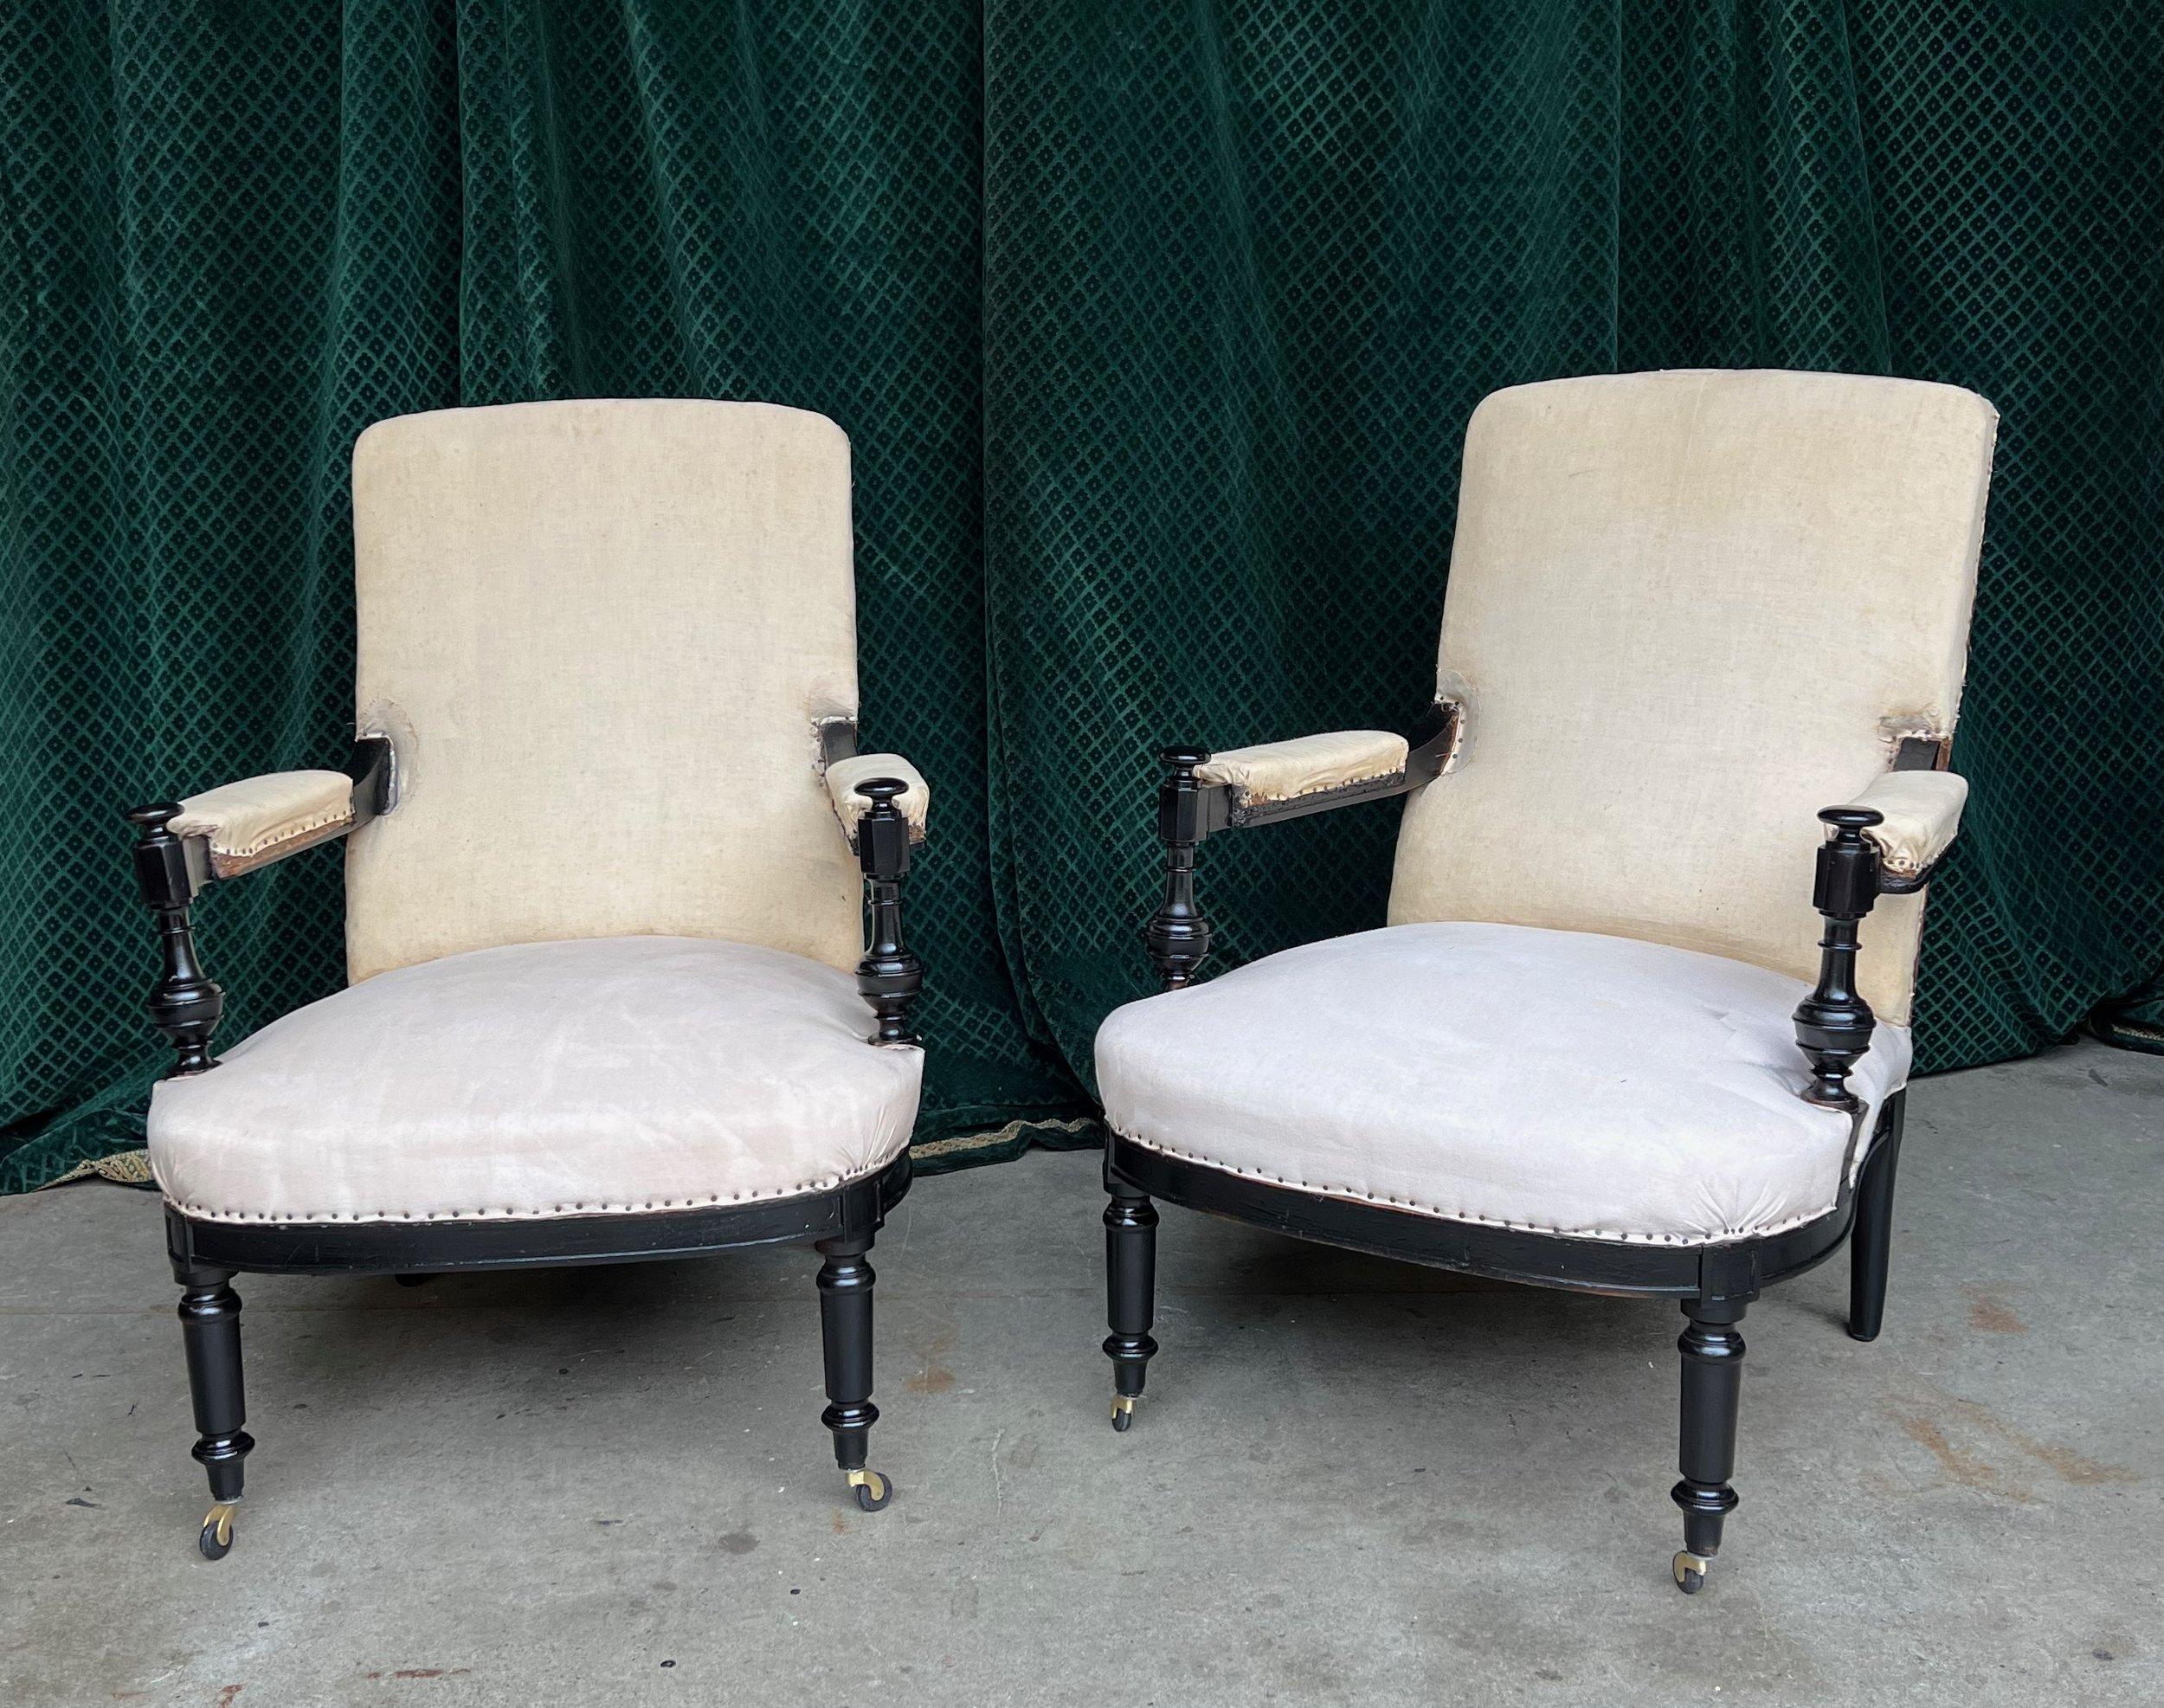 A classic pair of French Napoleon III armchairs, distinguished by their visible wooden arms and iconic turned legs. Originating from the 19th century, these chairs are captivating with their stunning spindle arm details, bringing a touch of